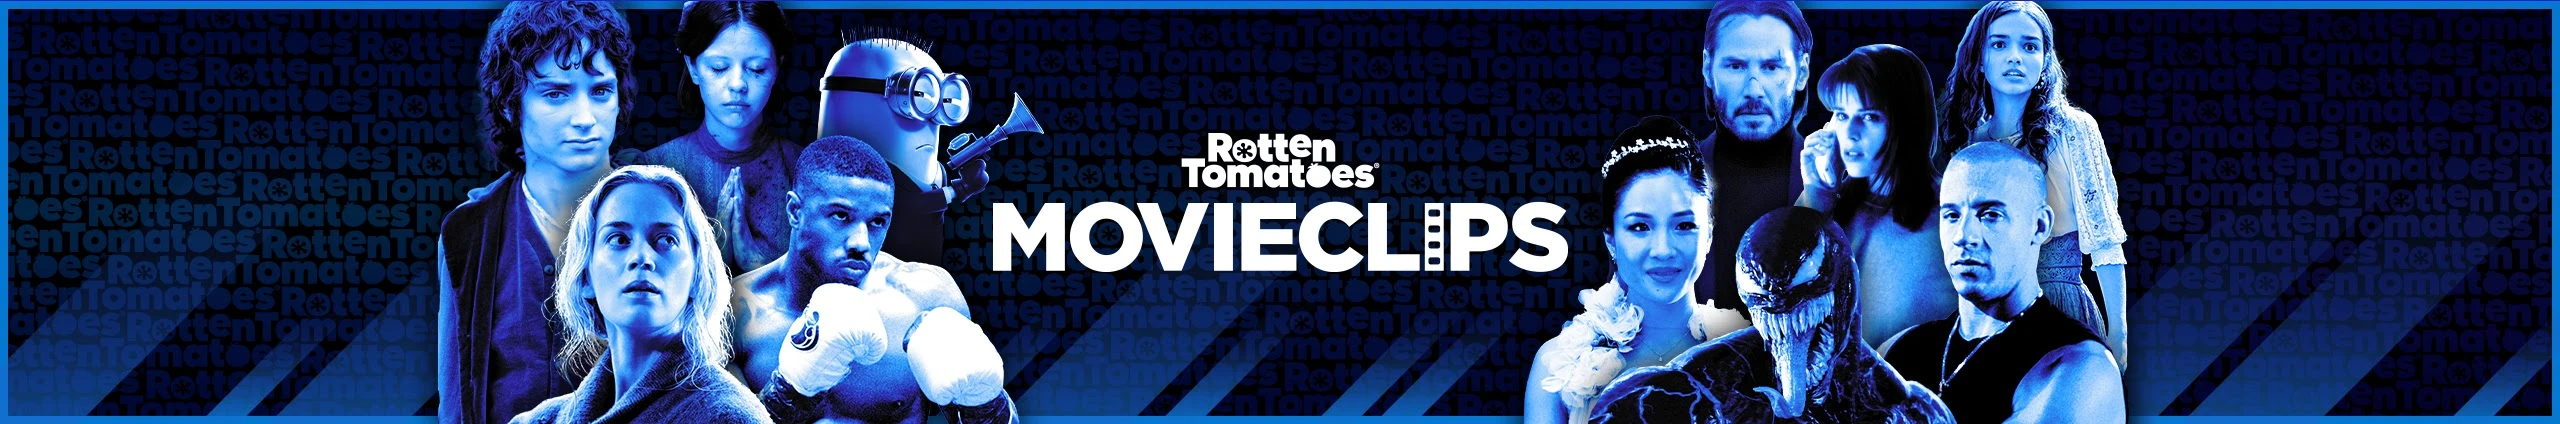 Movieclips's BANNER